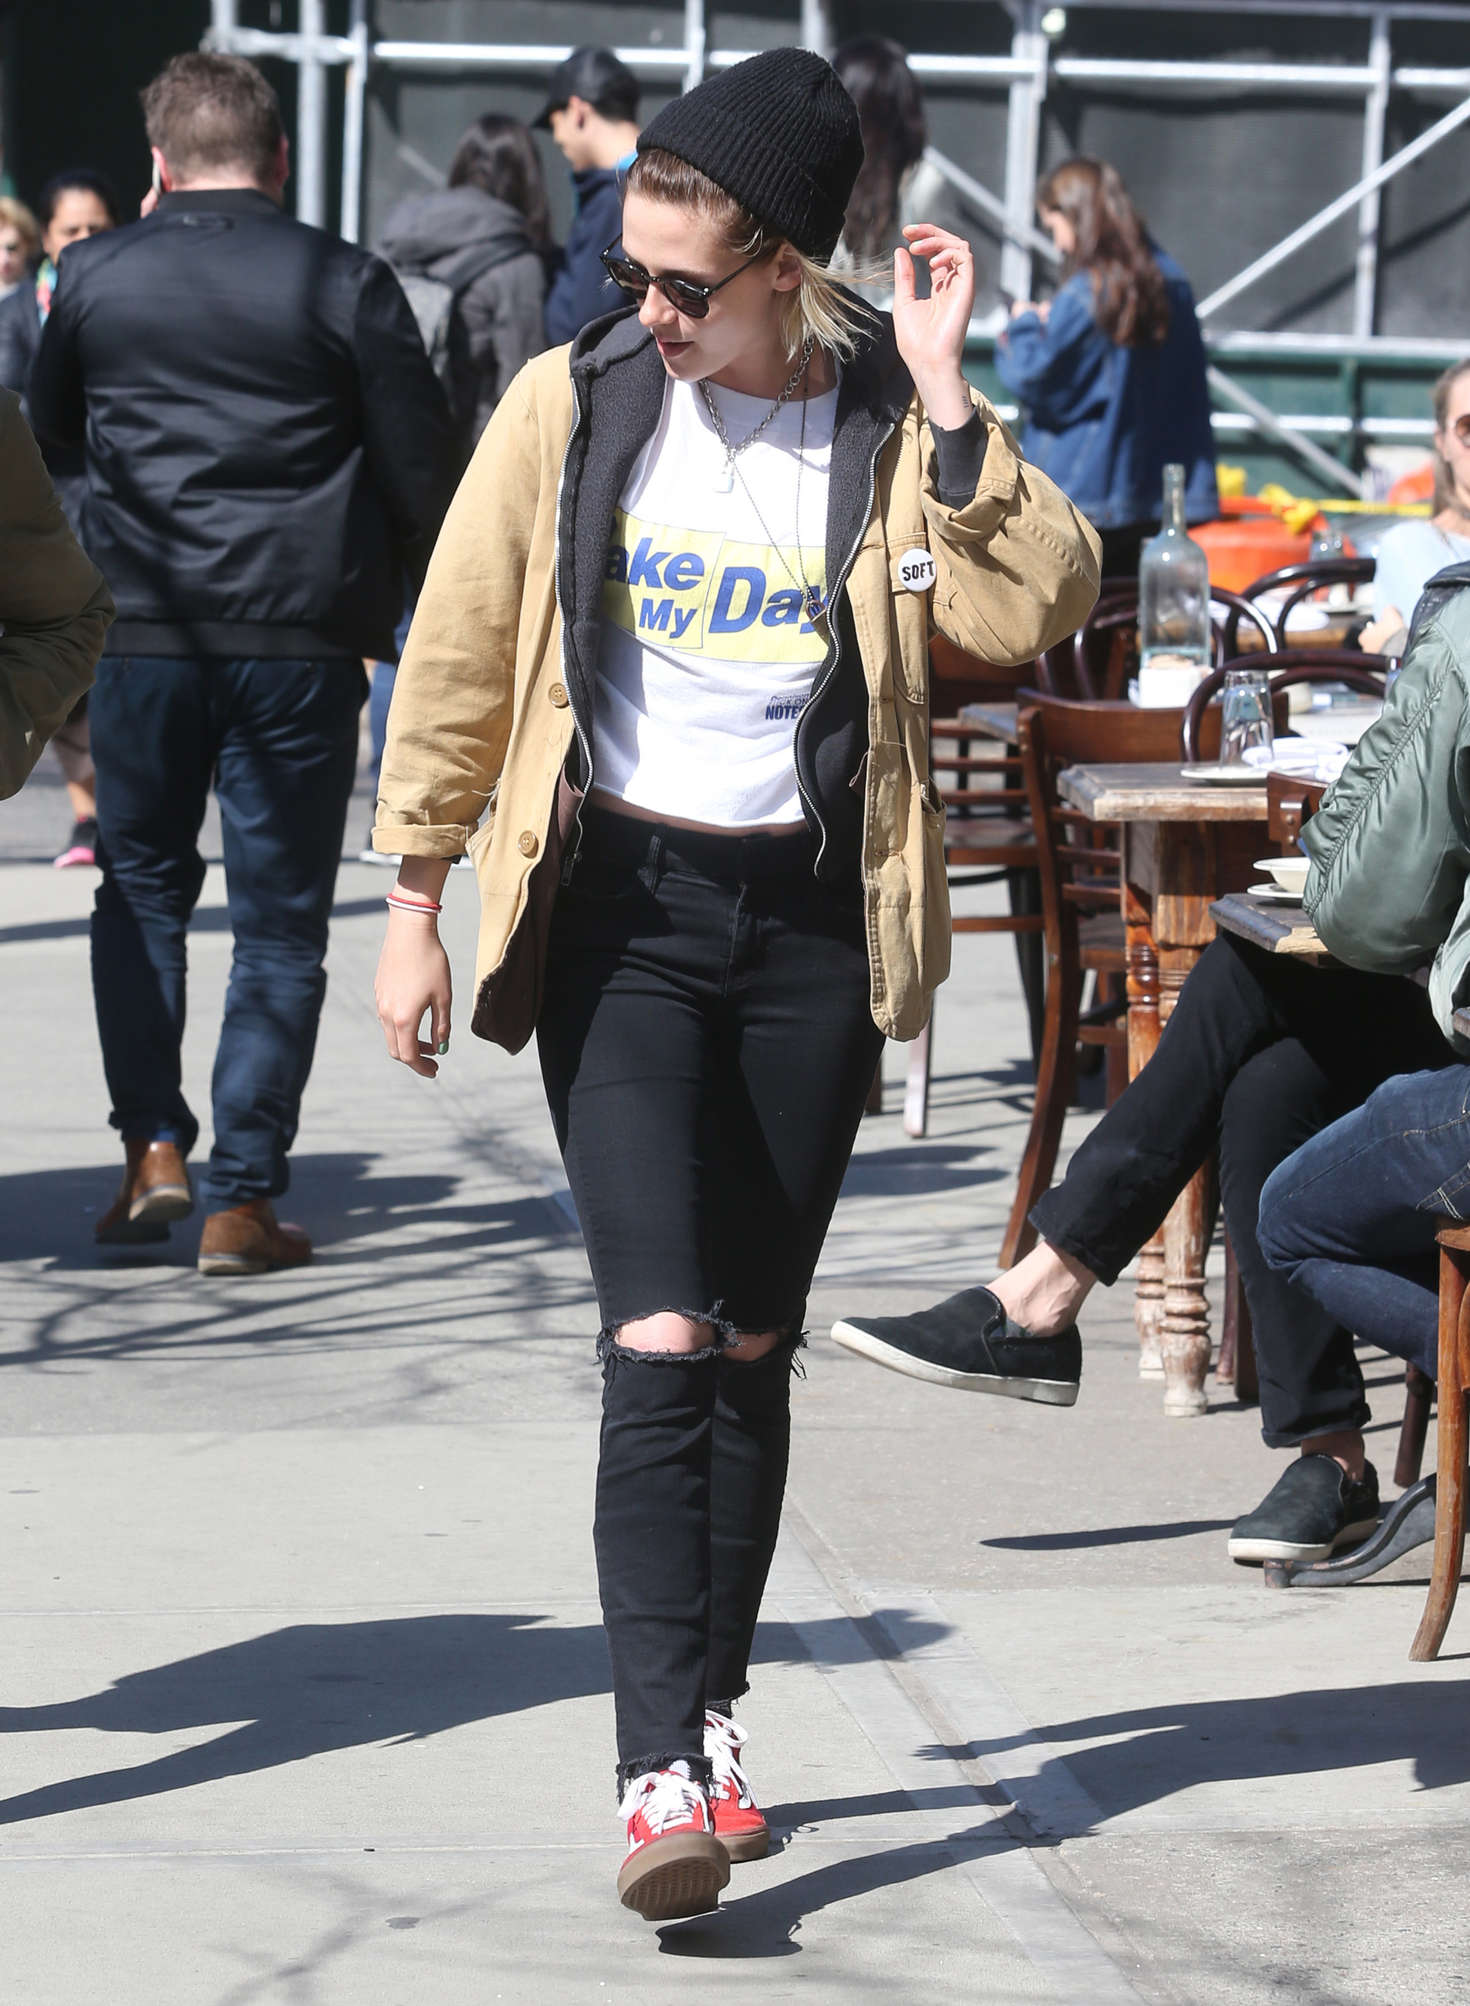 Kristen Stewart in Black Ripped Jeans out in New York City